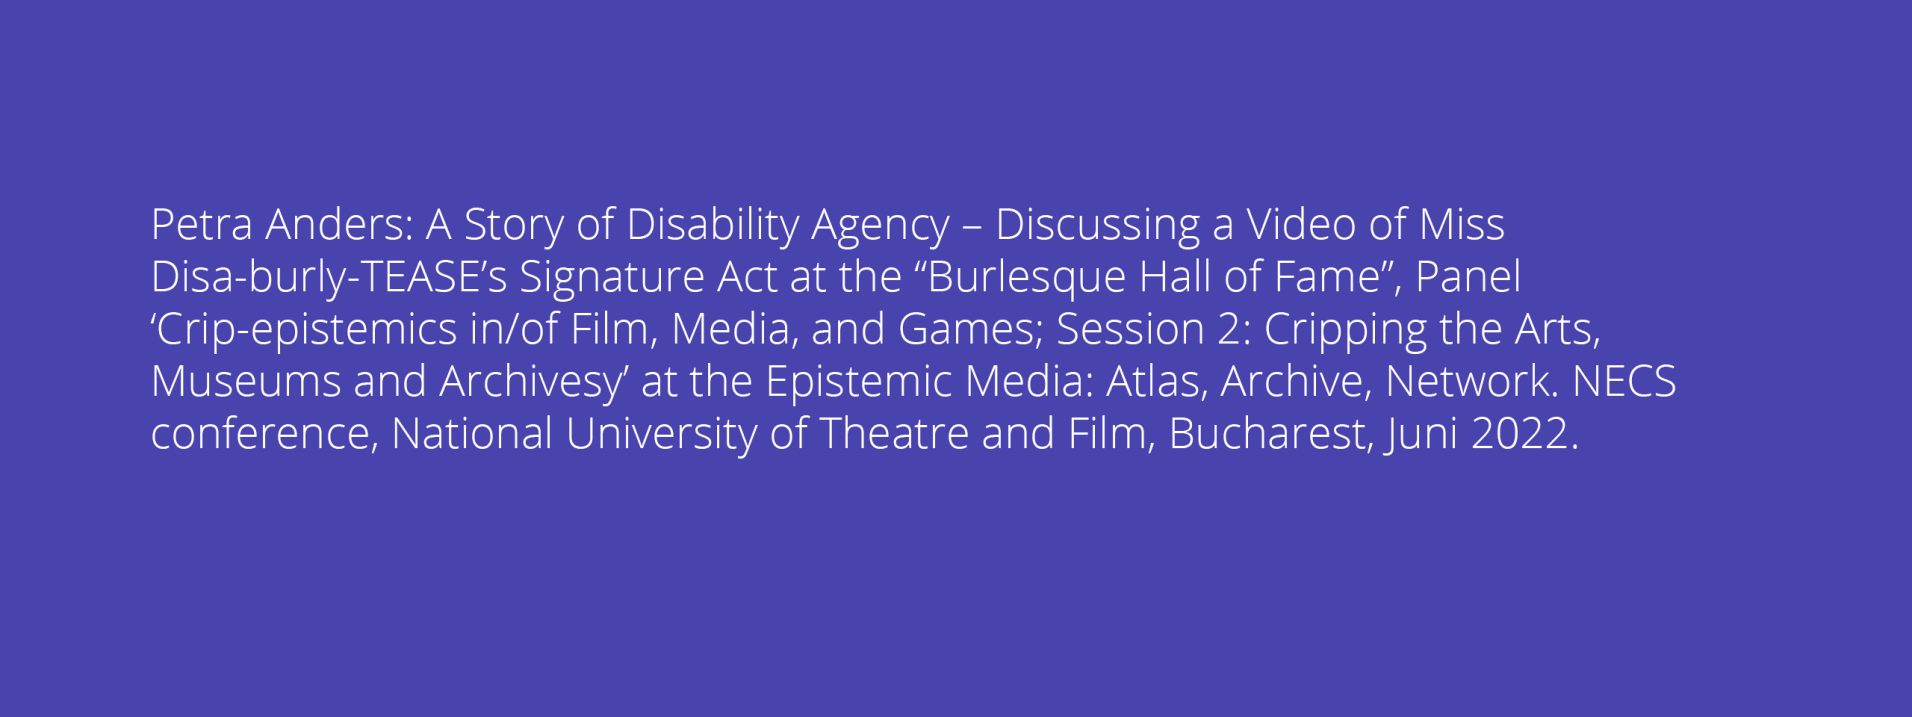 Petra Anders: A Story of Disability Agency – Discussing a Video of Miss Disa-burly-TEASE’s Signature Act at the “Burlesque Hall of Fame”, Panel ‘Crip-epistemics in/of Film, Media, and Games; Session 2: Cripping the Arts, Museums and Archivesy’ at the Epistemic Media: Atlas, Archive, Network. NECS conference, National University of Theatre and Film, Bucharest, Juni 2022.